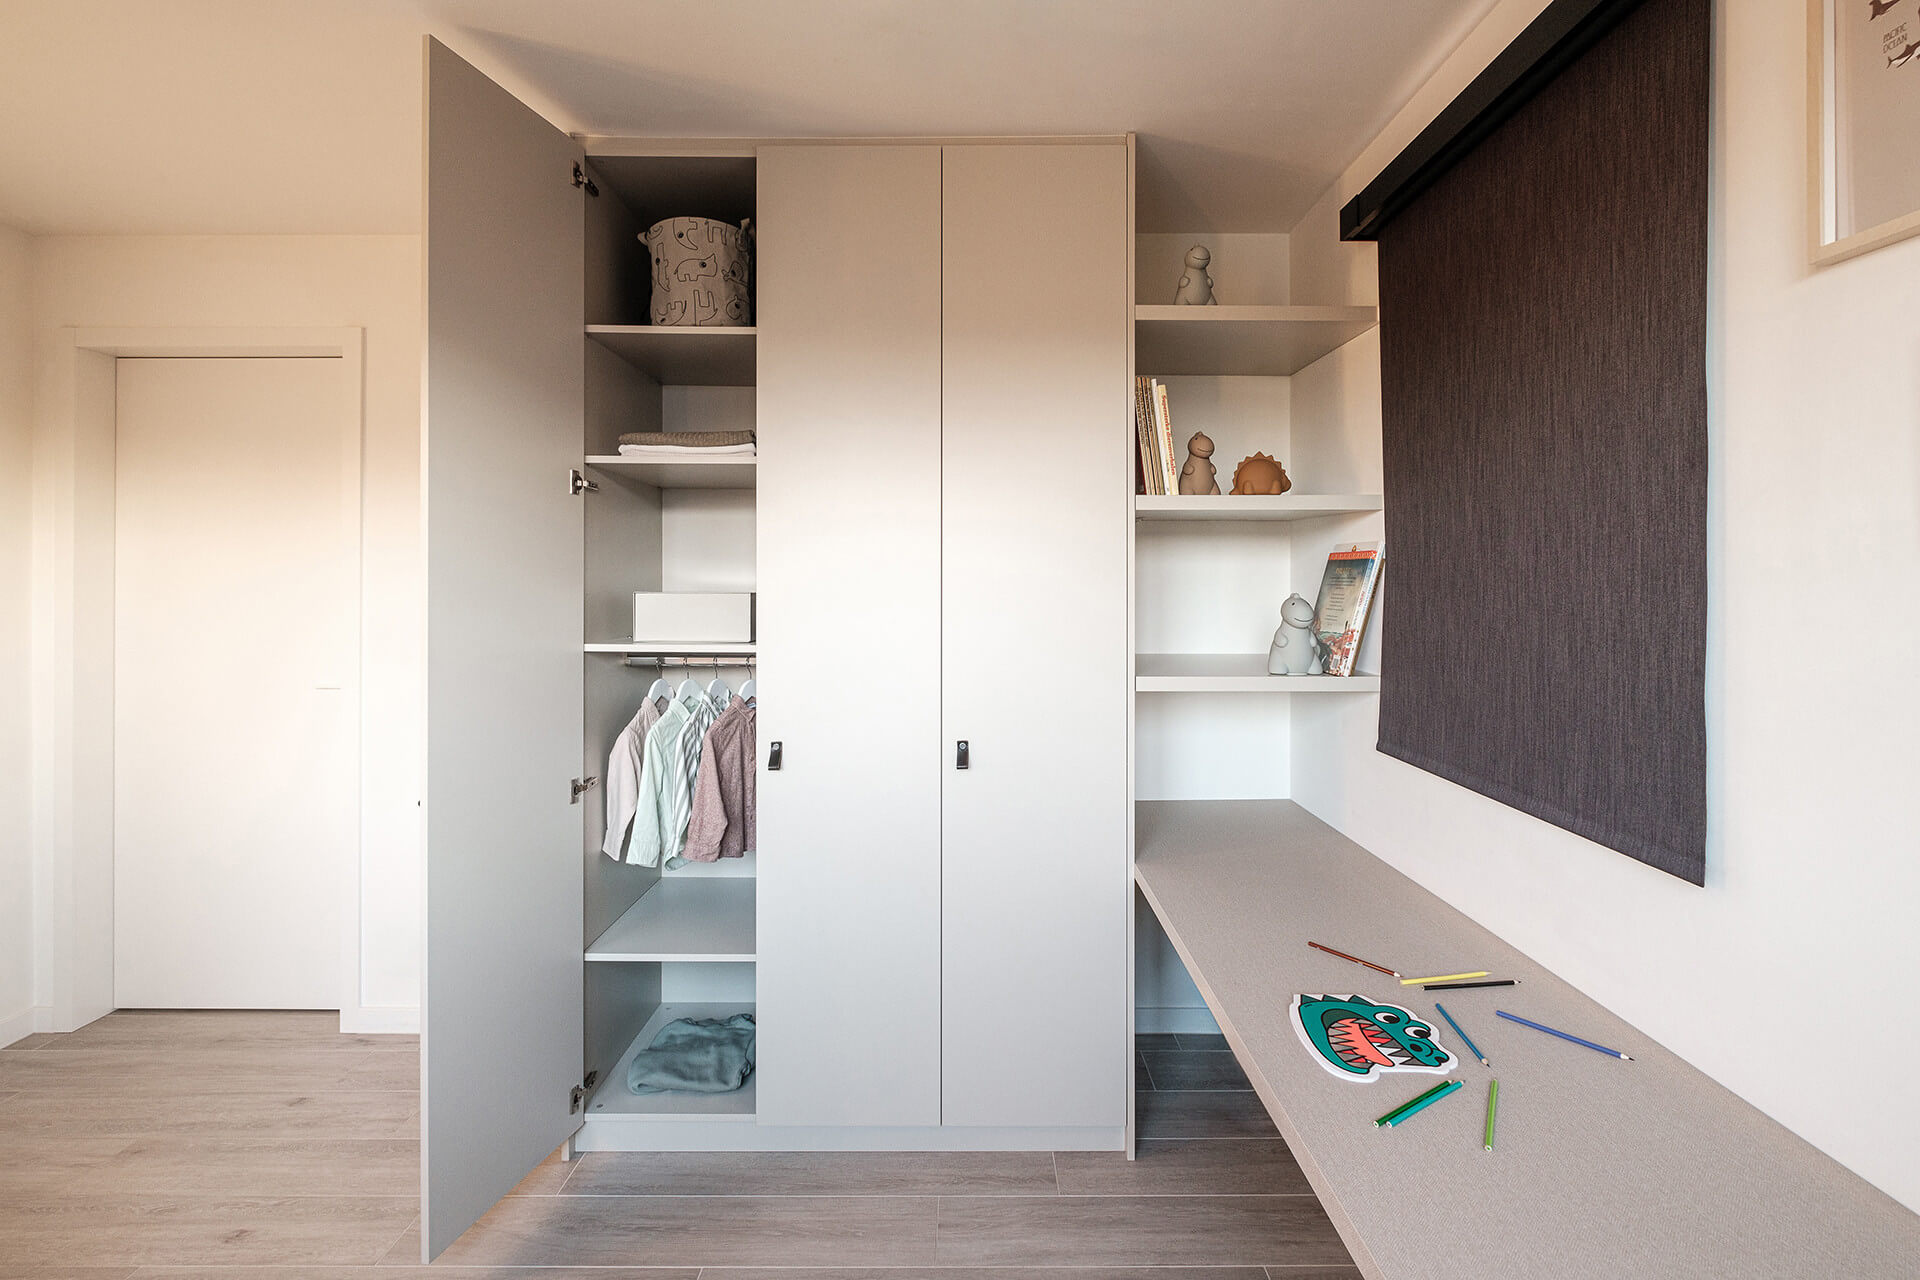  Custom wardrobe with a matching desk tablet for the children's room.